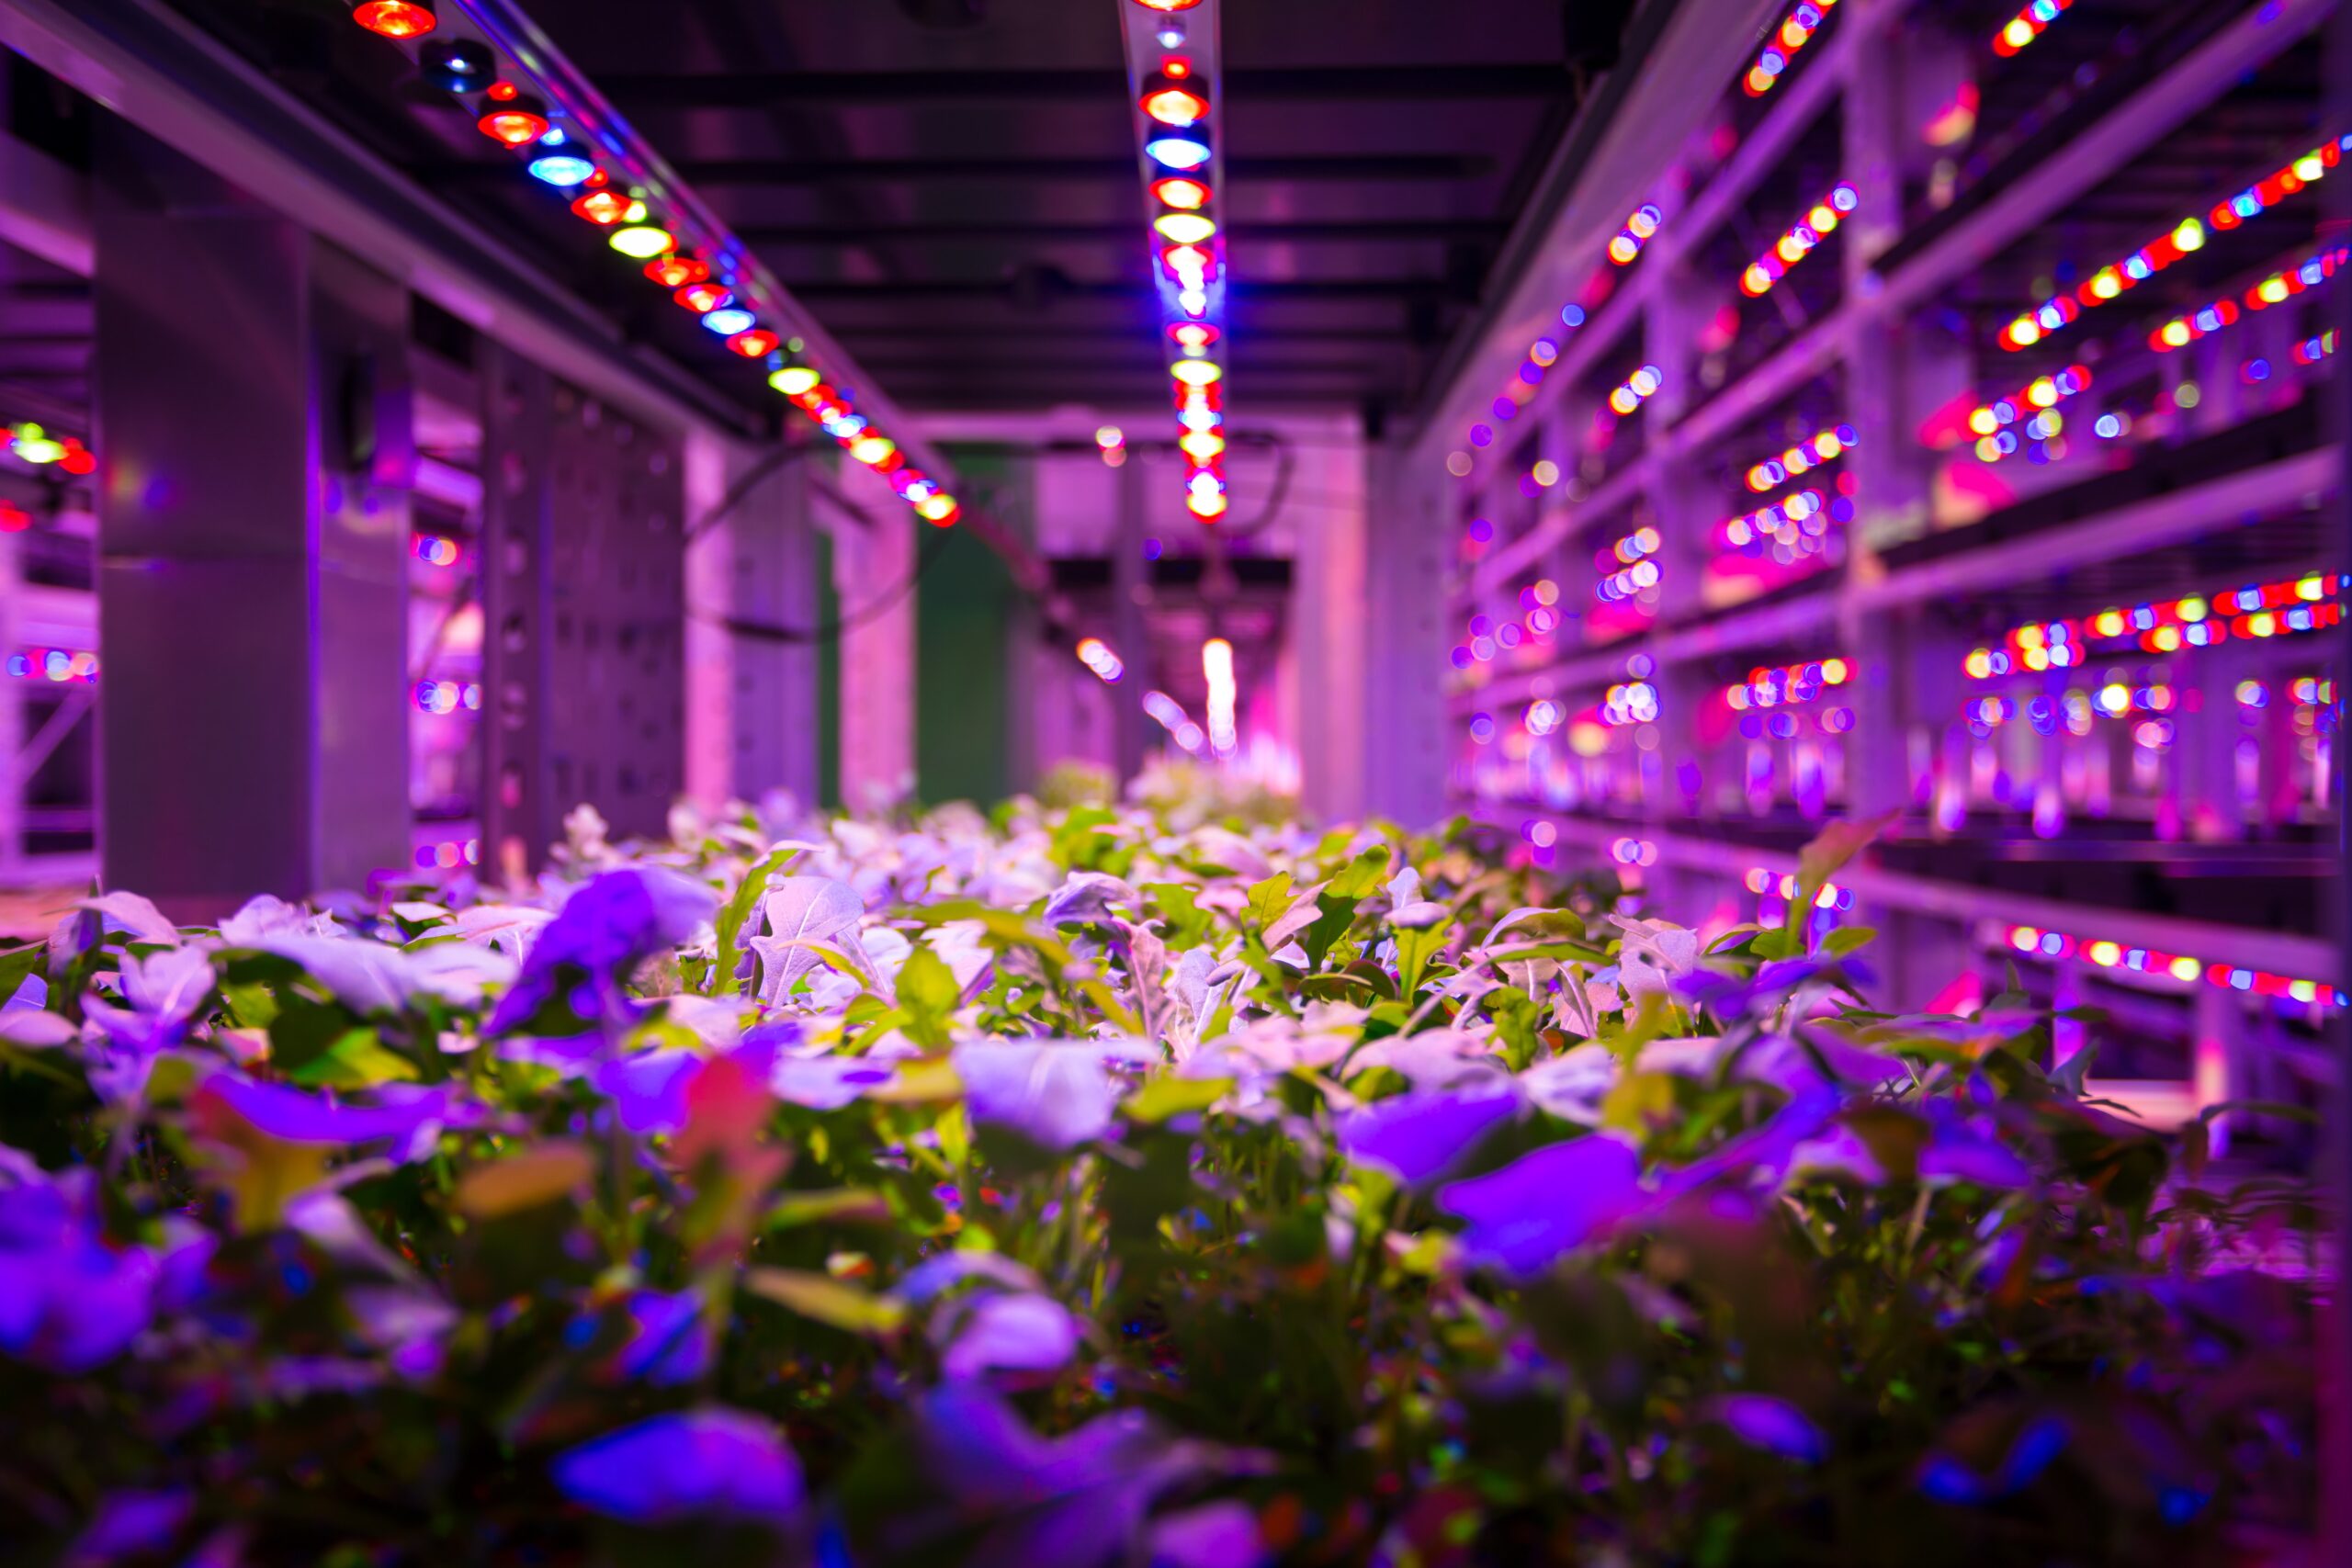 An Indoor Farm In Upstate New York | Earth Wise